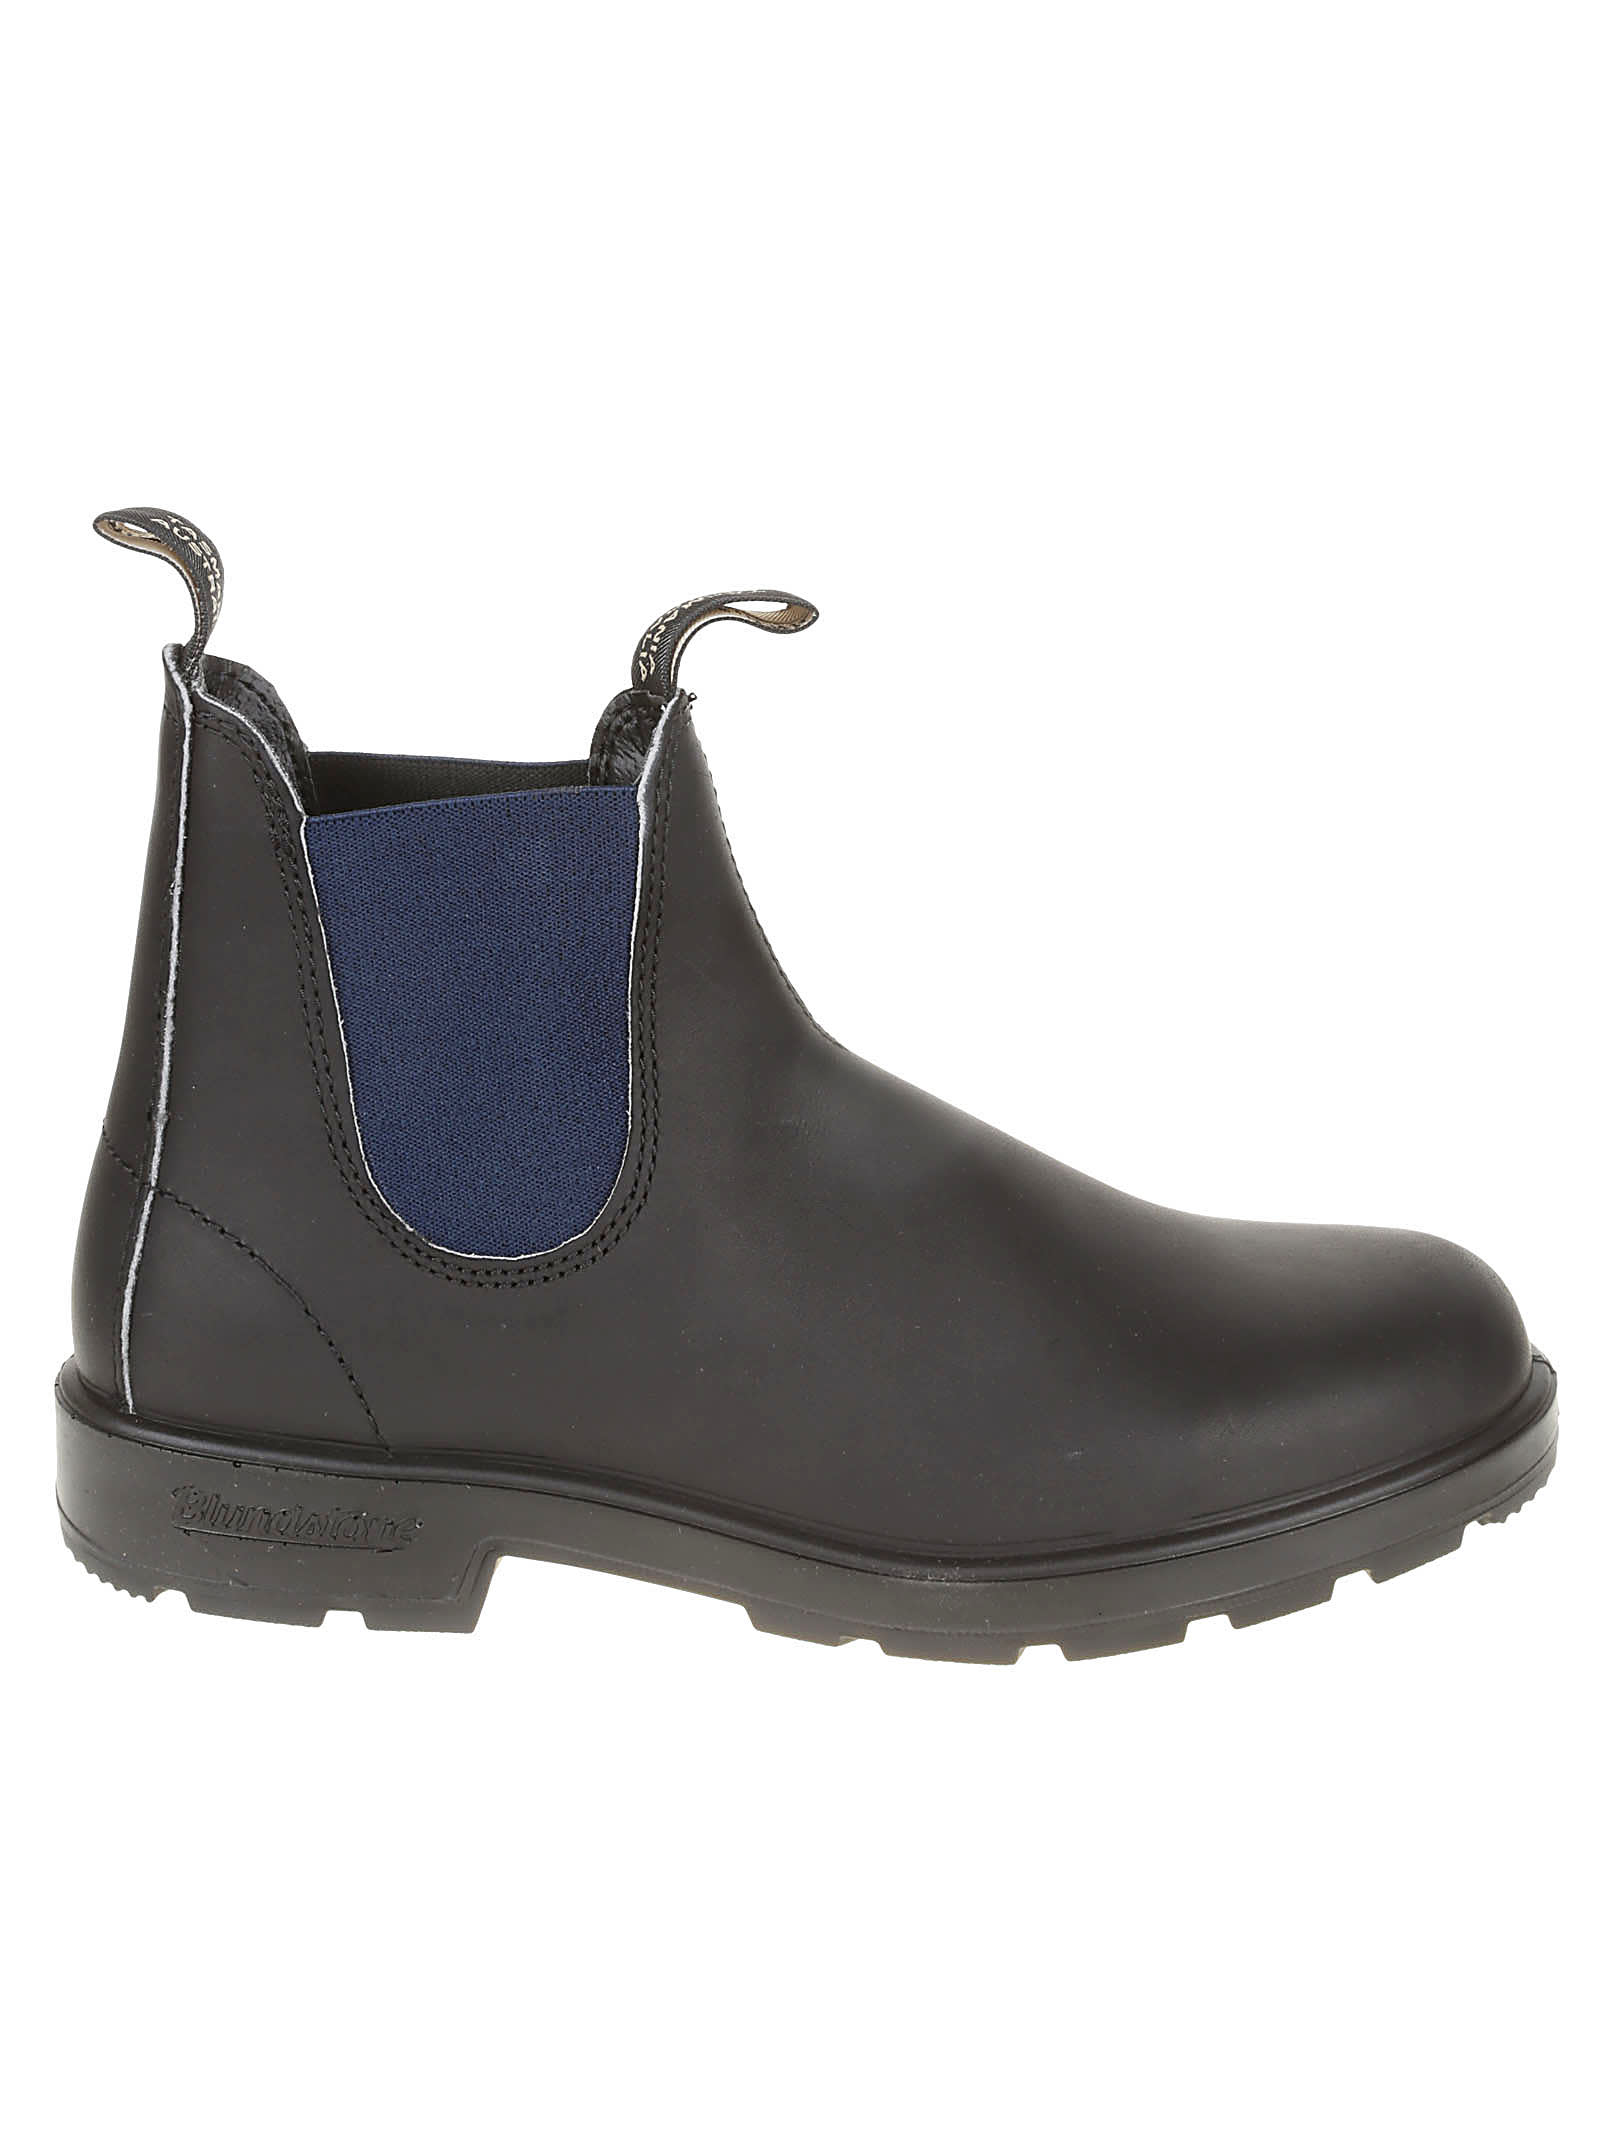 BLUNDSTONE COLORED ELASTIC SIDED BOOTS